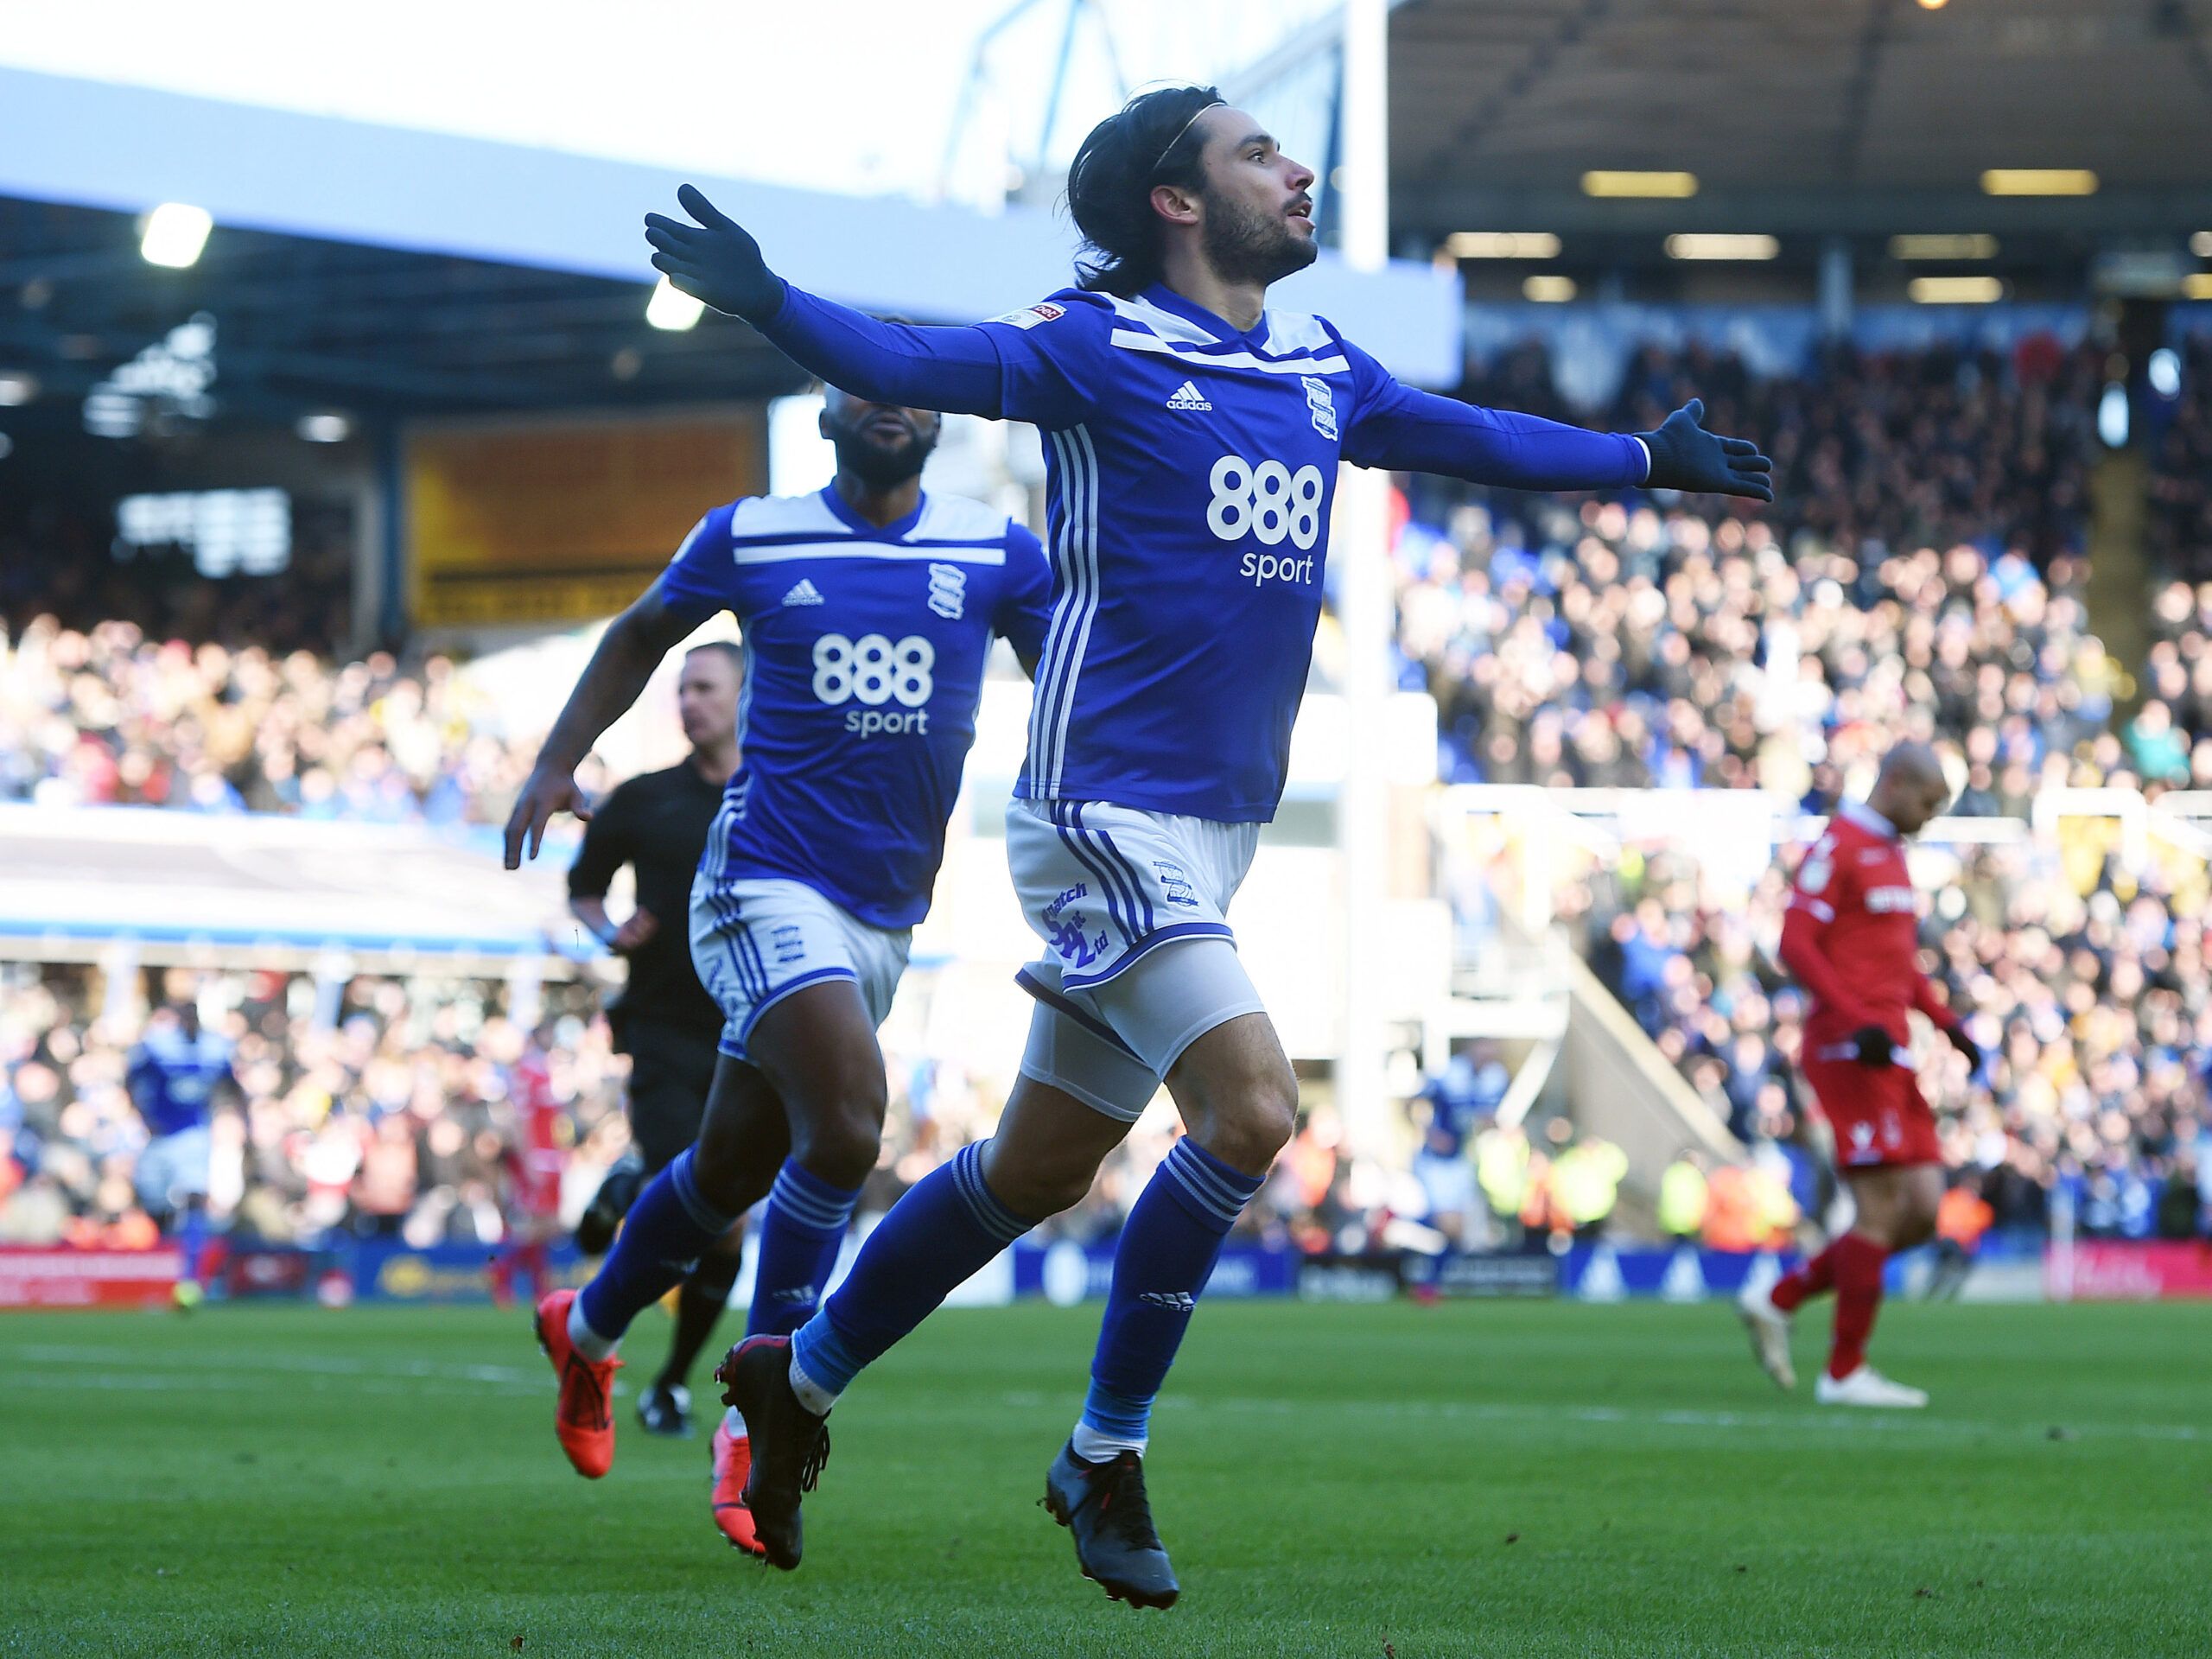 Soccer Football - Championship - Birmingham City v Nottingham Forest - St Andrew's, Birmingham, Britain - February 2, 2019   Birmingham's Jota celebrates scoring their first goal    Action Images/Alan Walter    EDITORIAL USE ONLY. No use with unauthorized audio, video, data, fixture lists, club/league logos or 